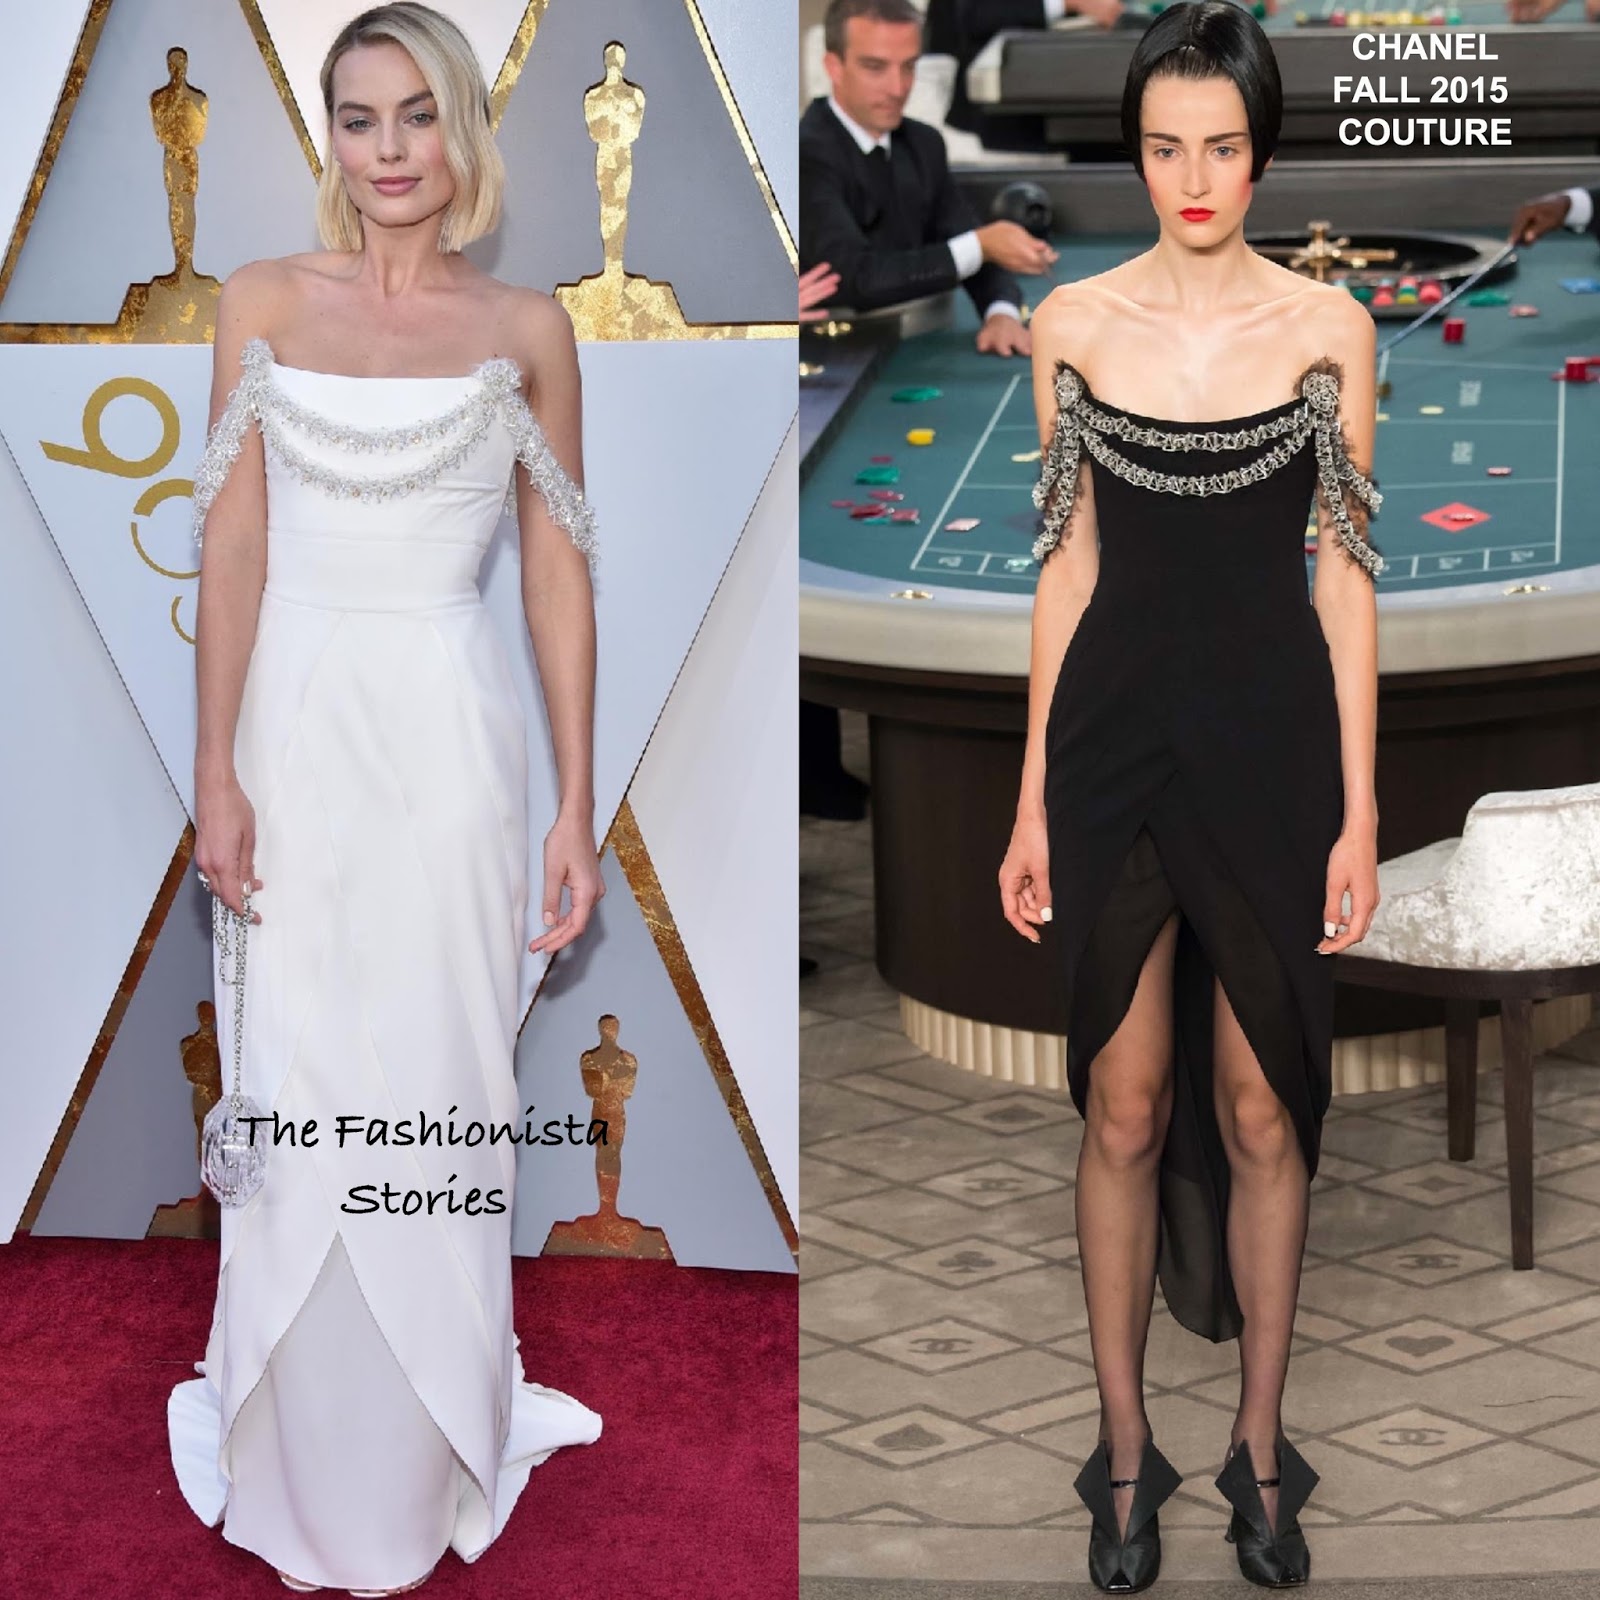 Margot Robbie in Chanel Couture at the 90th Academy Awards